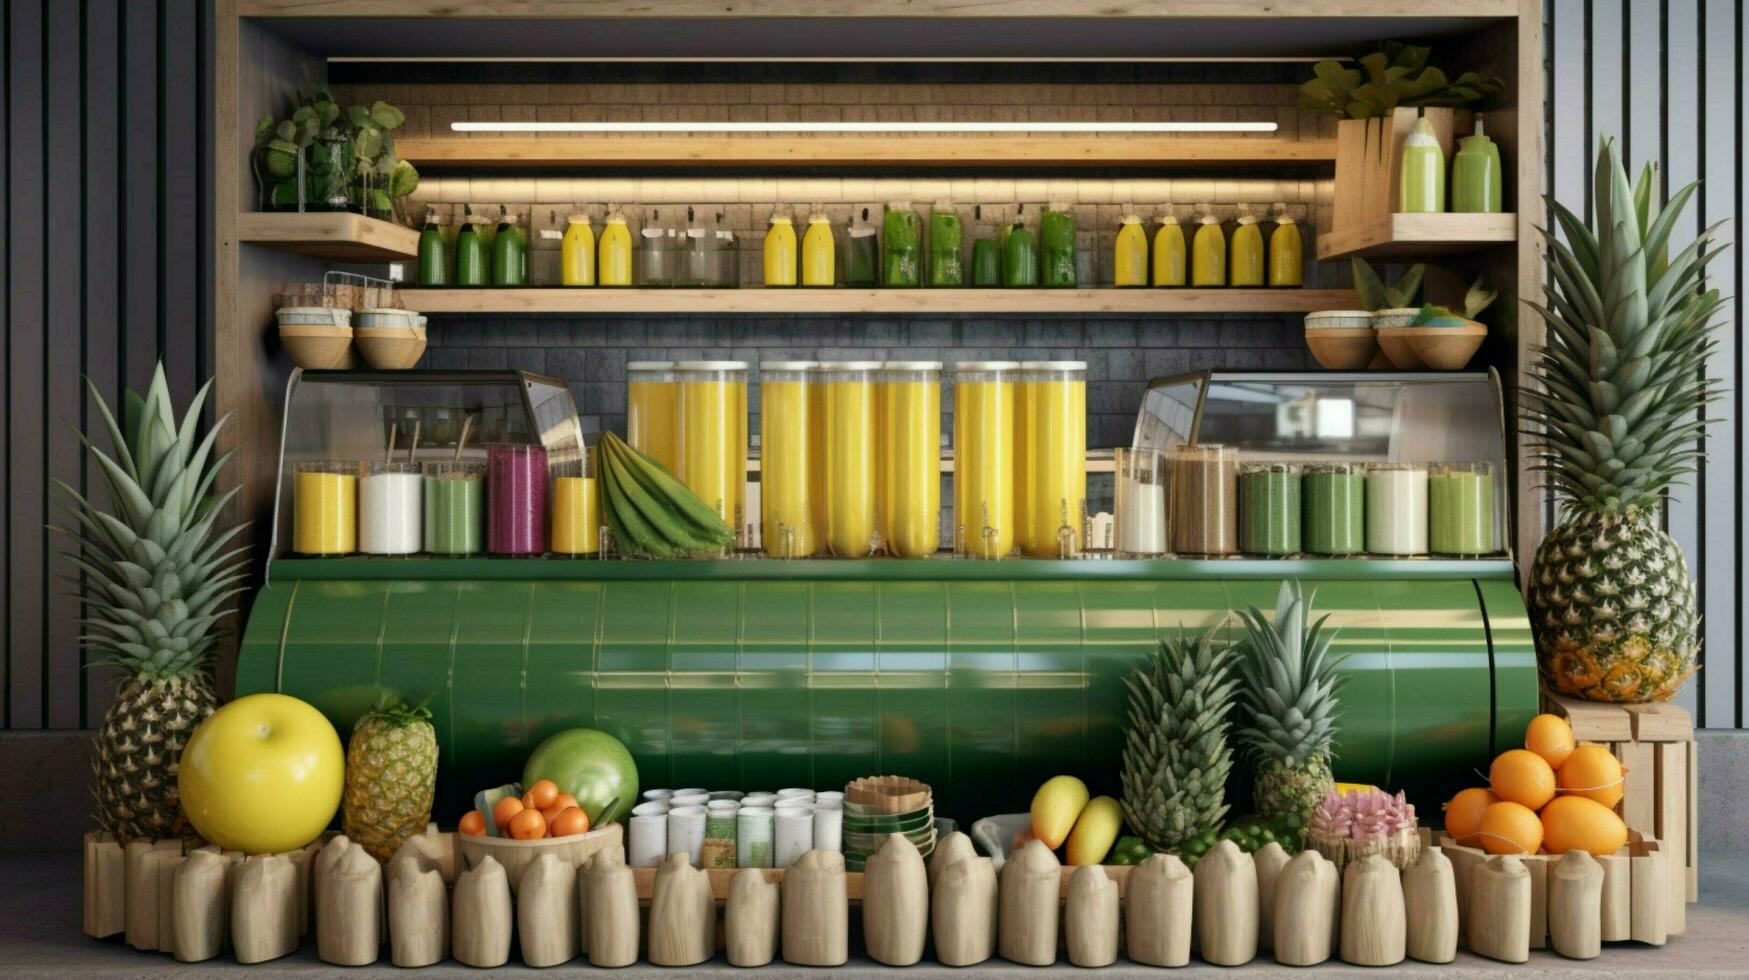 a juice bar featuring fresh vegetable and fruit photo